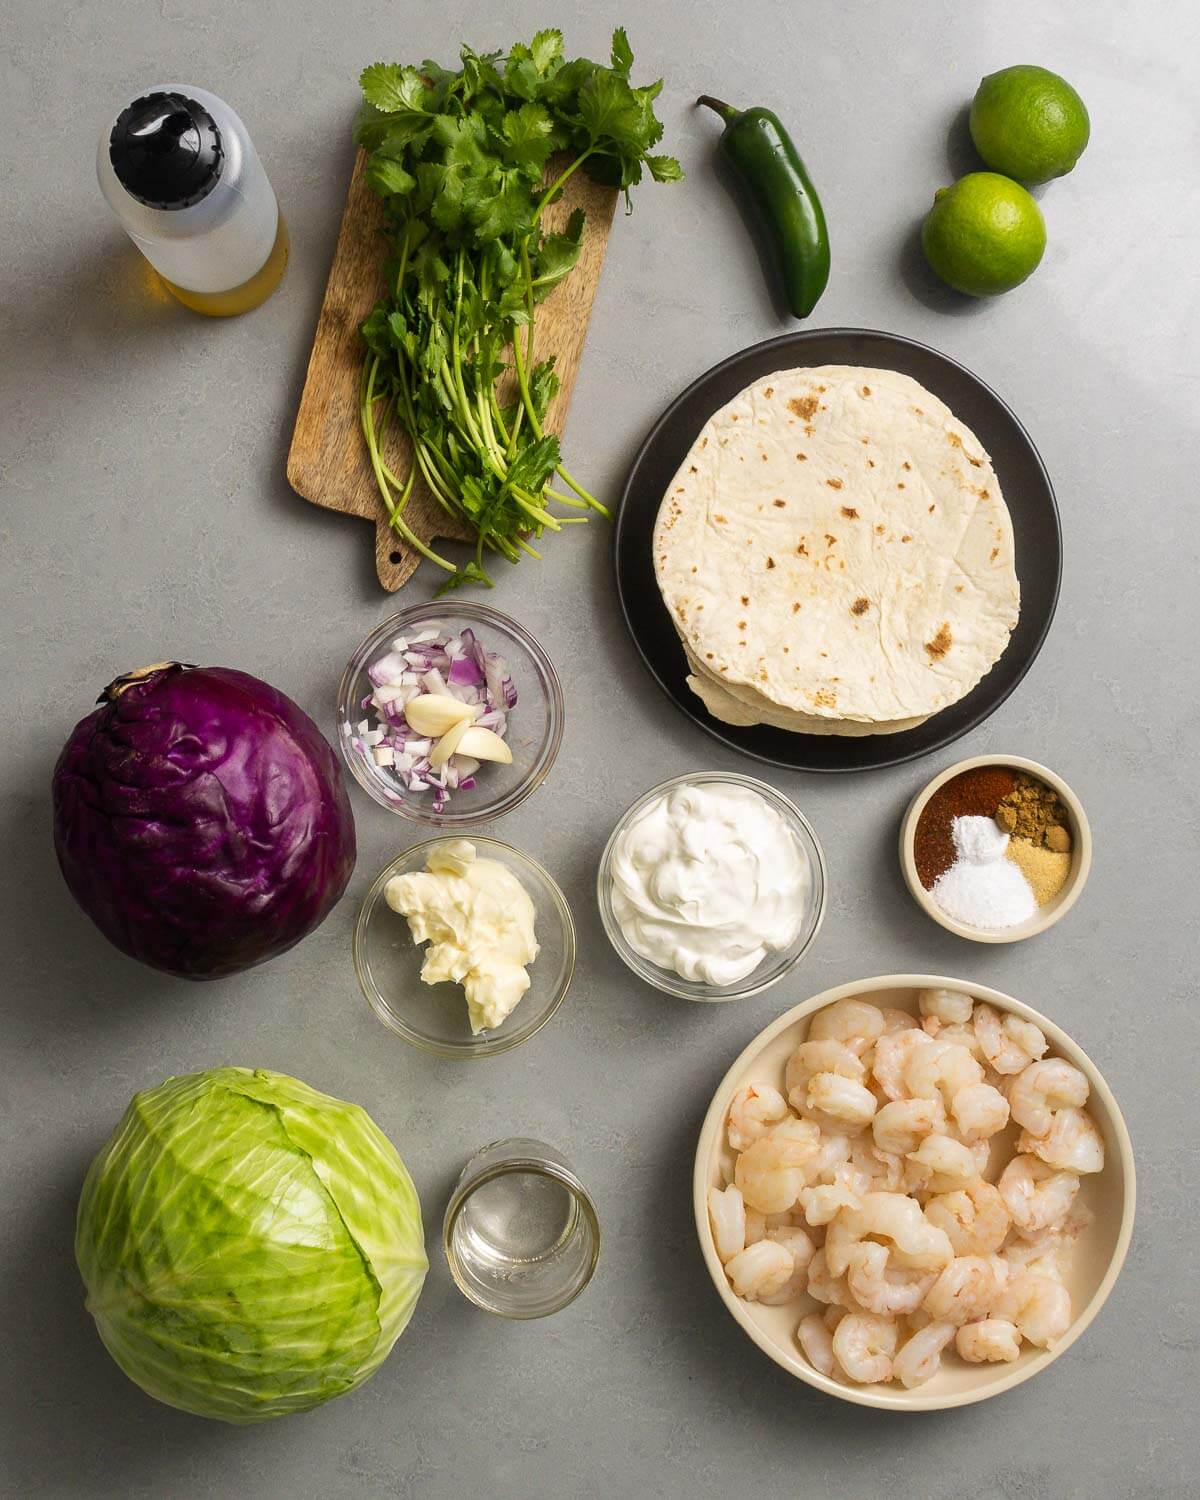 Ingredient shown: olive oil, cilantro, jalapeno, limes, tortillas, garlic, onion, cabbage, mayonnaise, sour cream, spice and chili powder, tequila, and shrimp.